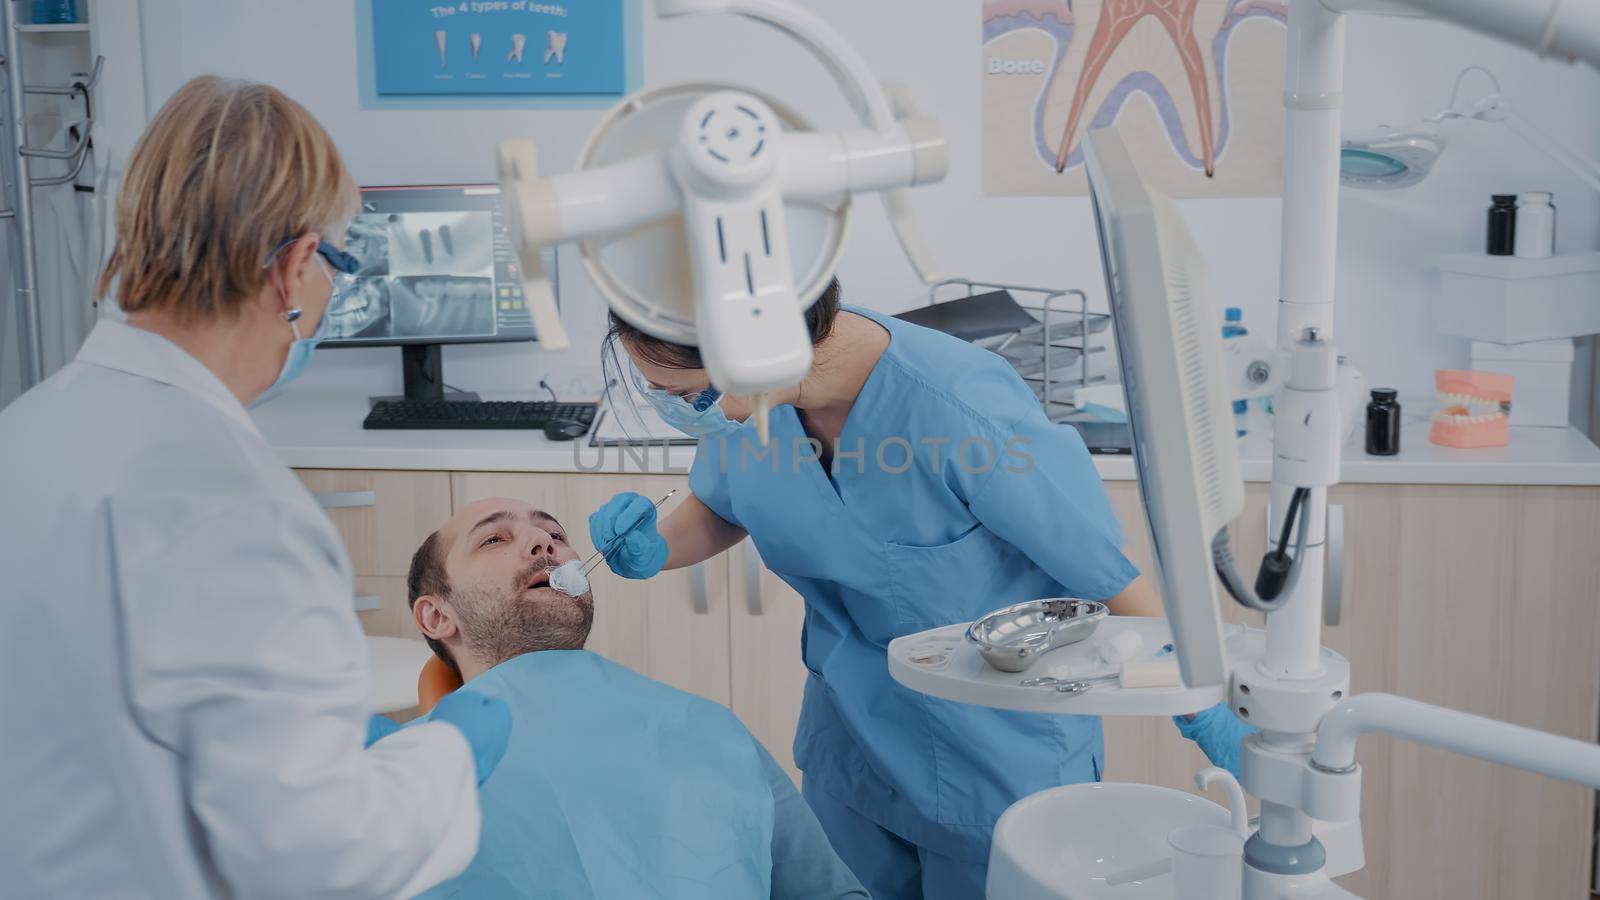 Dentistry team performing tooth extraction in stomatology cabinet, doing orthodontic procedure on patient in pain. Nurse and dentist using dental tools and equipment for oral care.